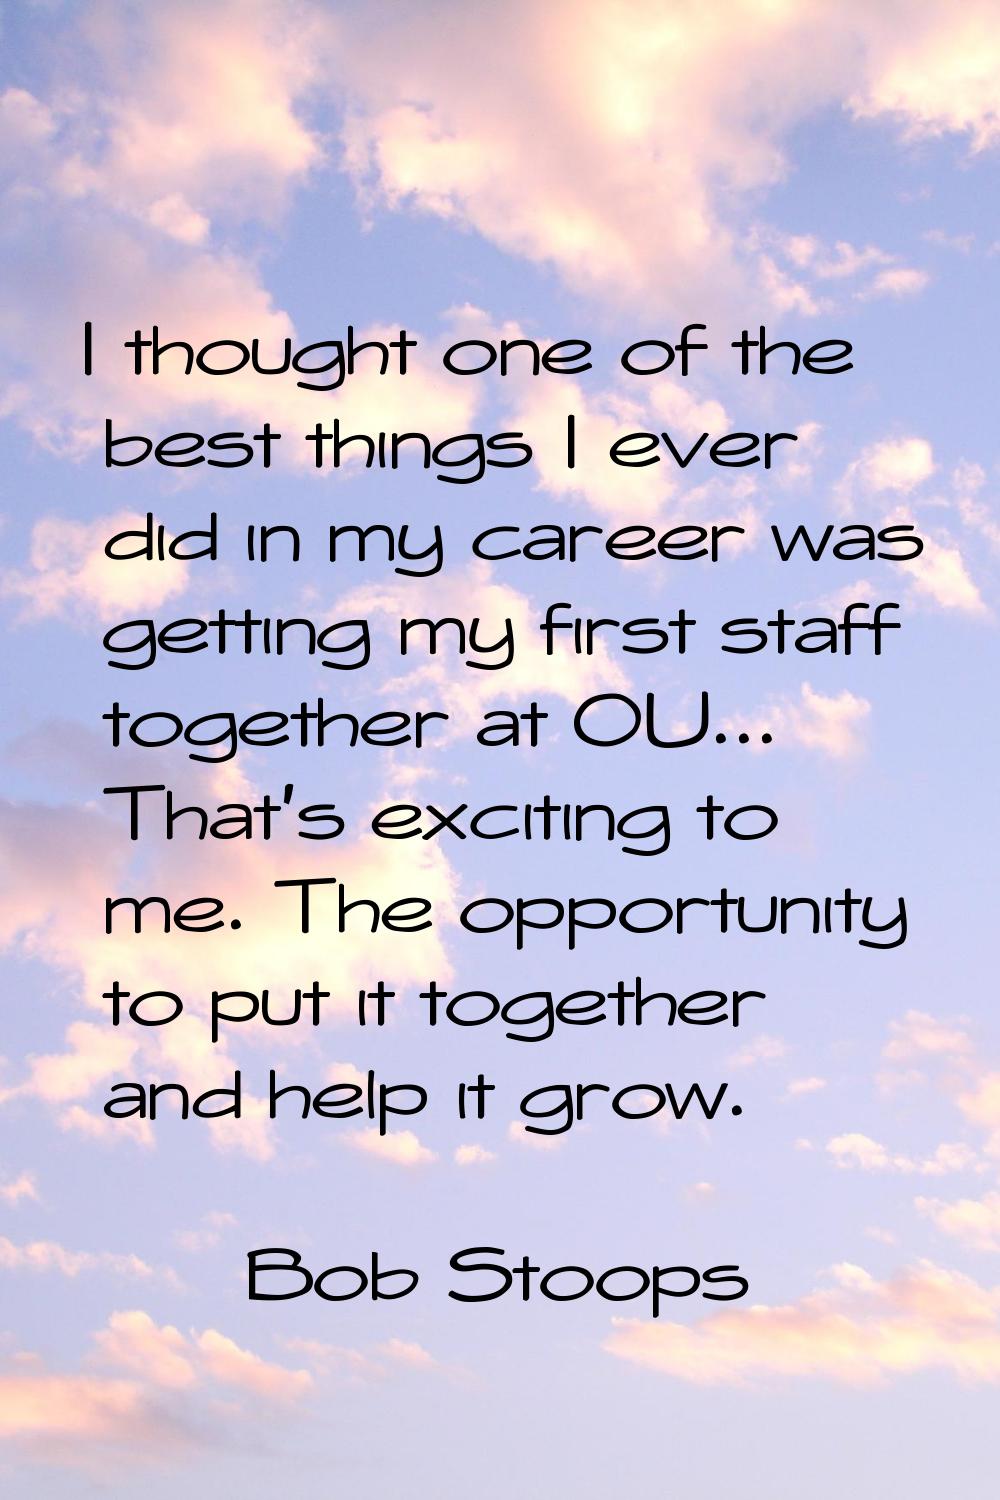 I thought one of the best things I ever did in my career was getting my first staff together at OU.